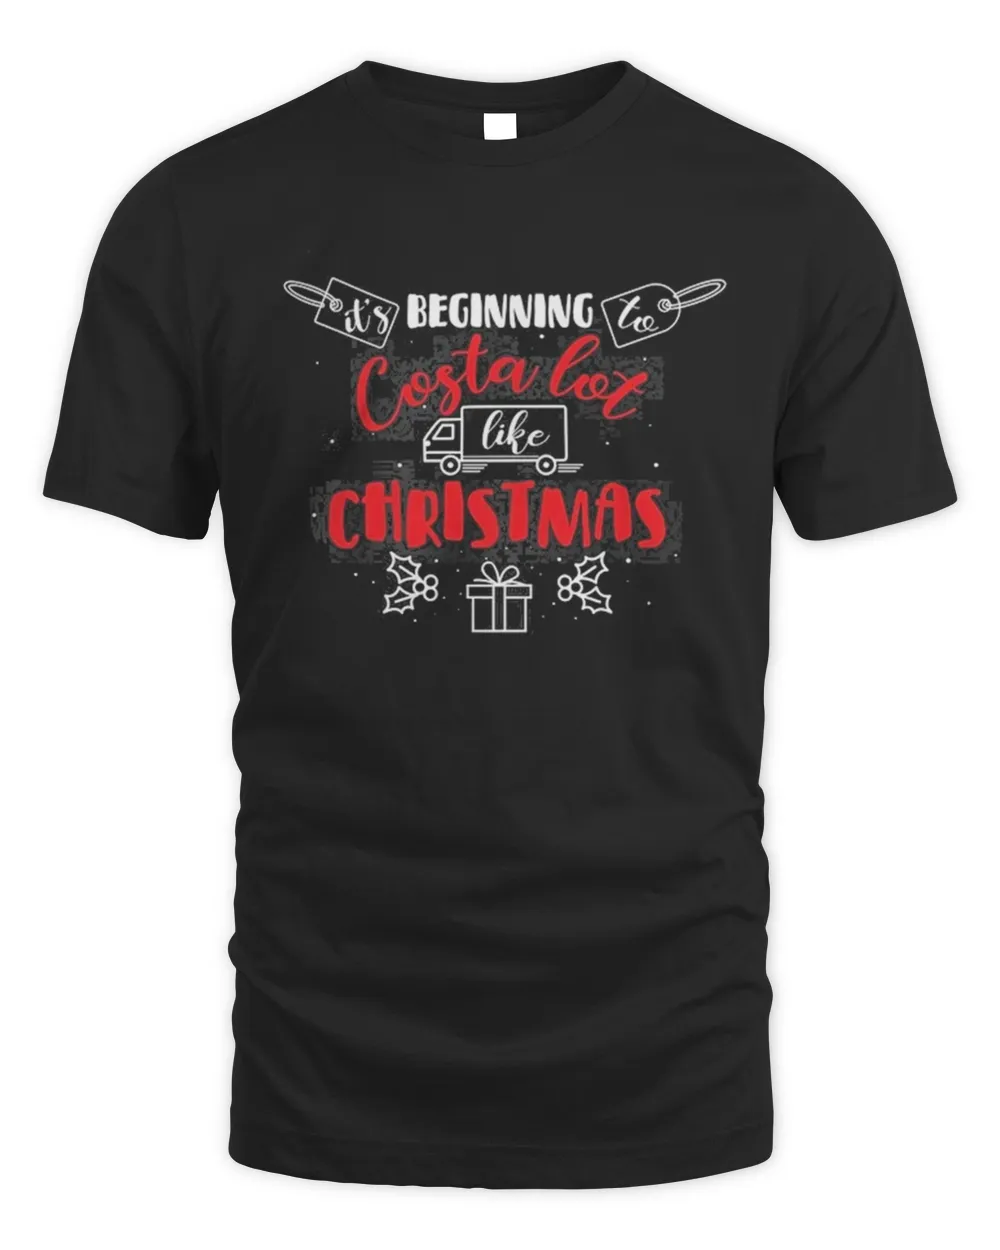 It's Beginning To Cost a Lot Like Christmas Shirt